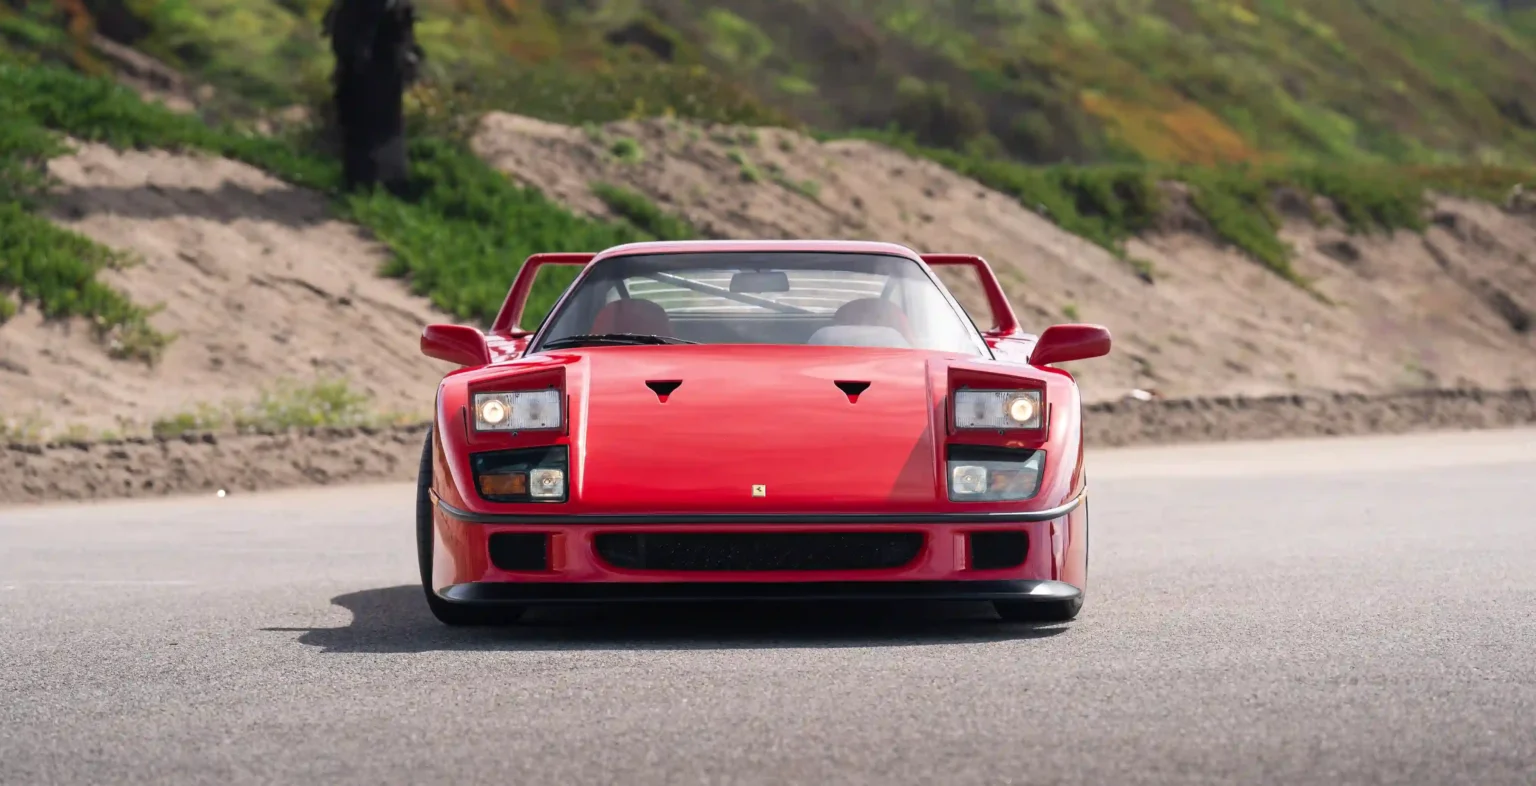 A classic 1990s Ferrari F40, driven less than a mile per day over 34 years, is up for sale at £2 million. This iconic supercar has a top speed of 229 mph.